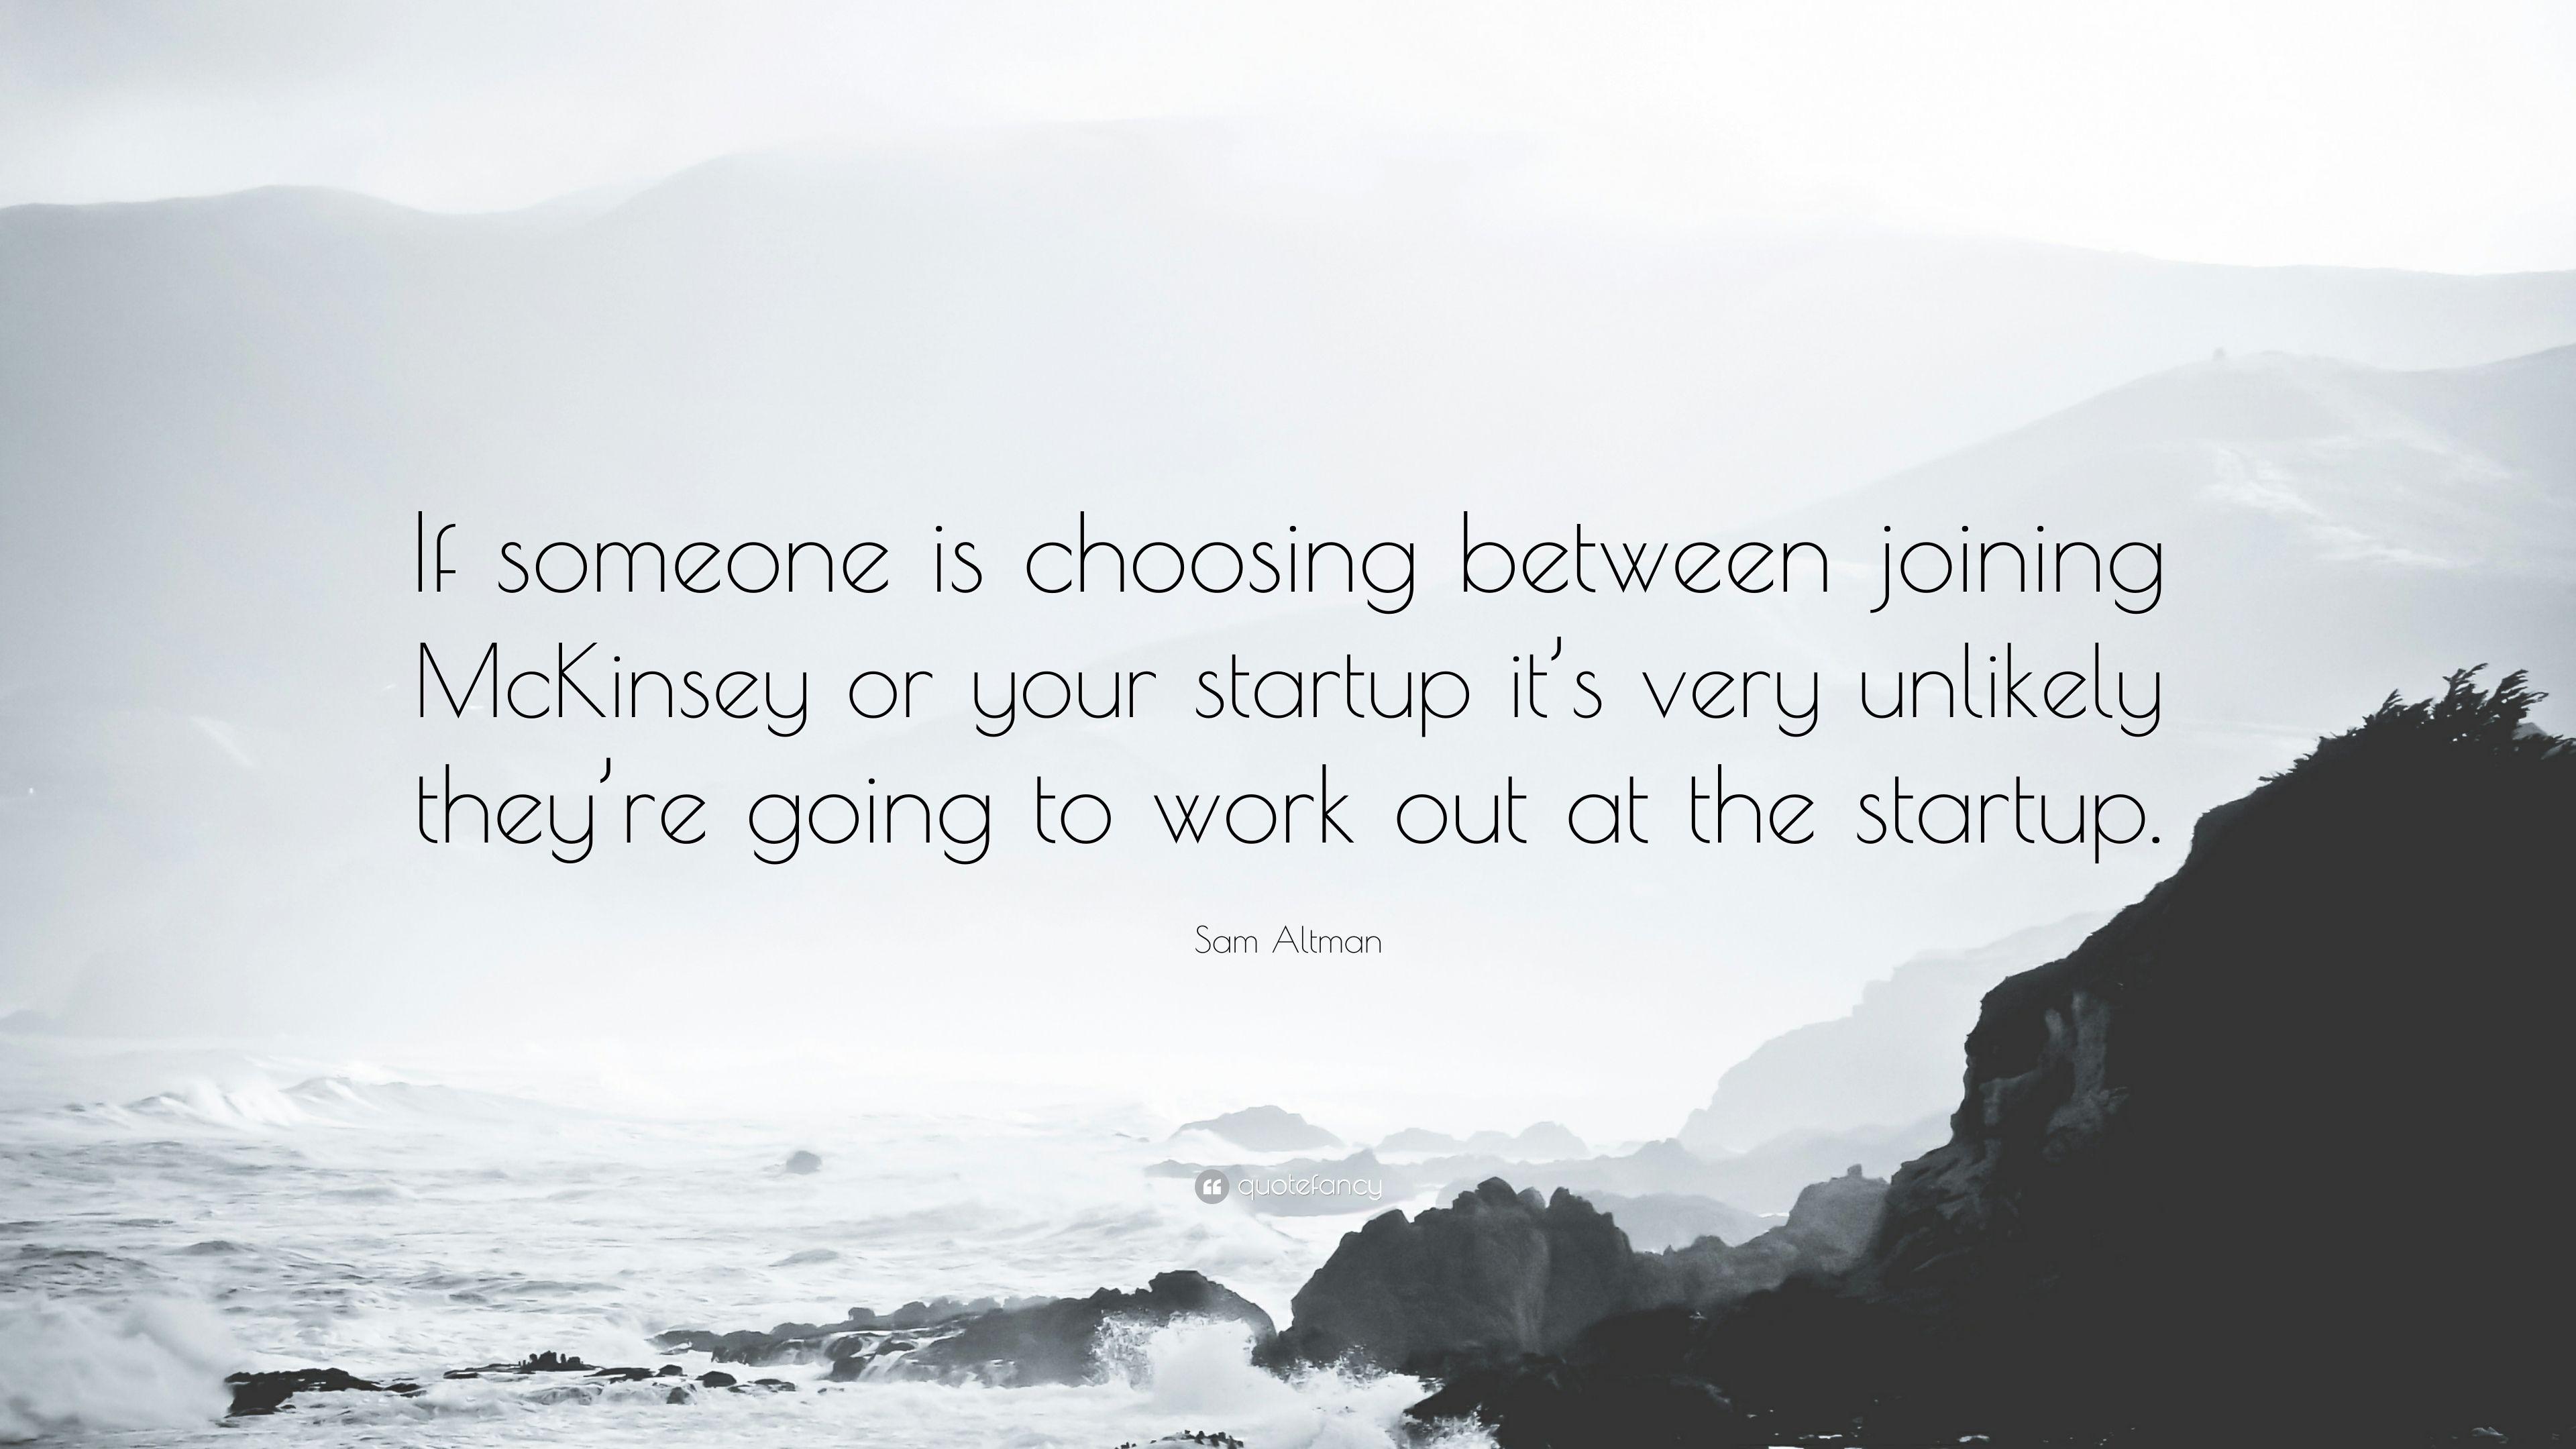 Sam Altman Quote: “If someone is choosing between joining McKinsey